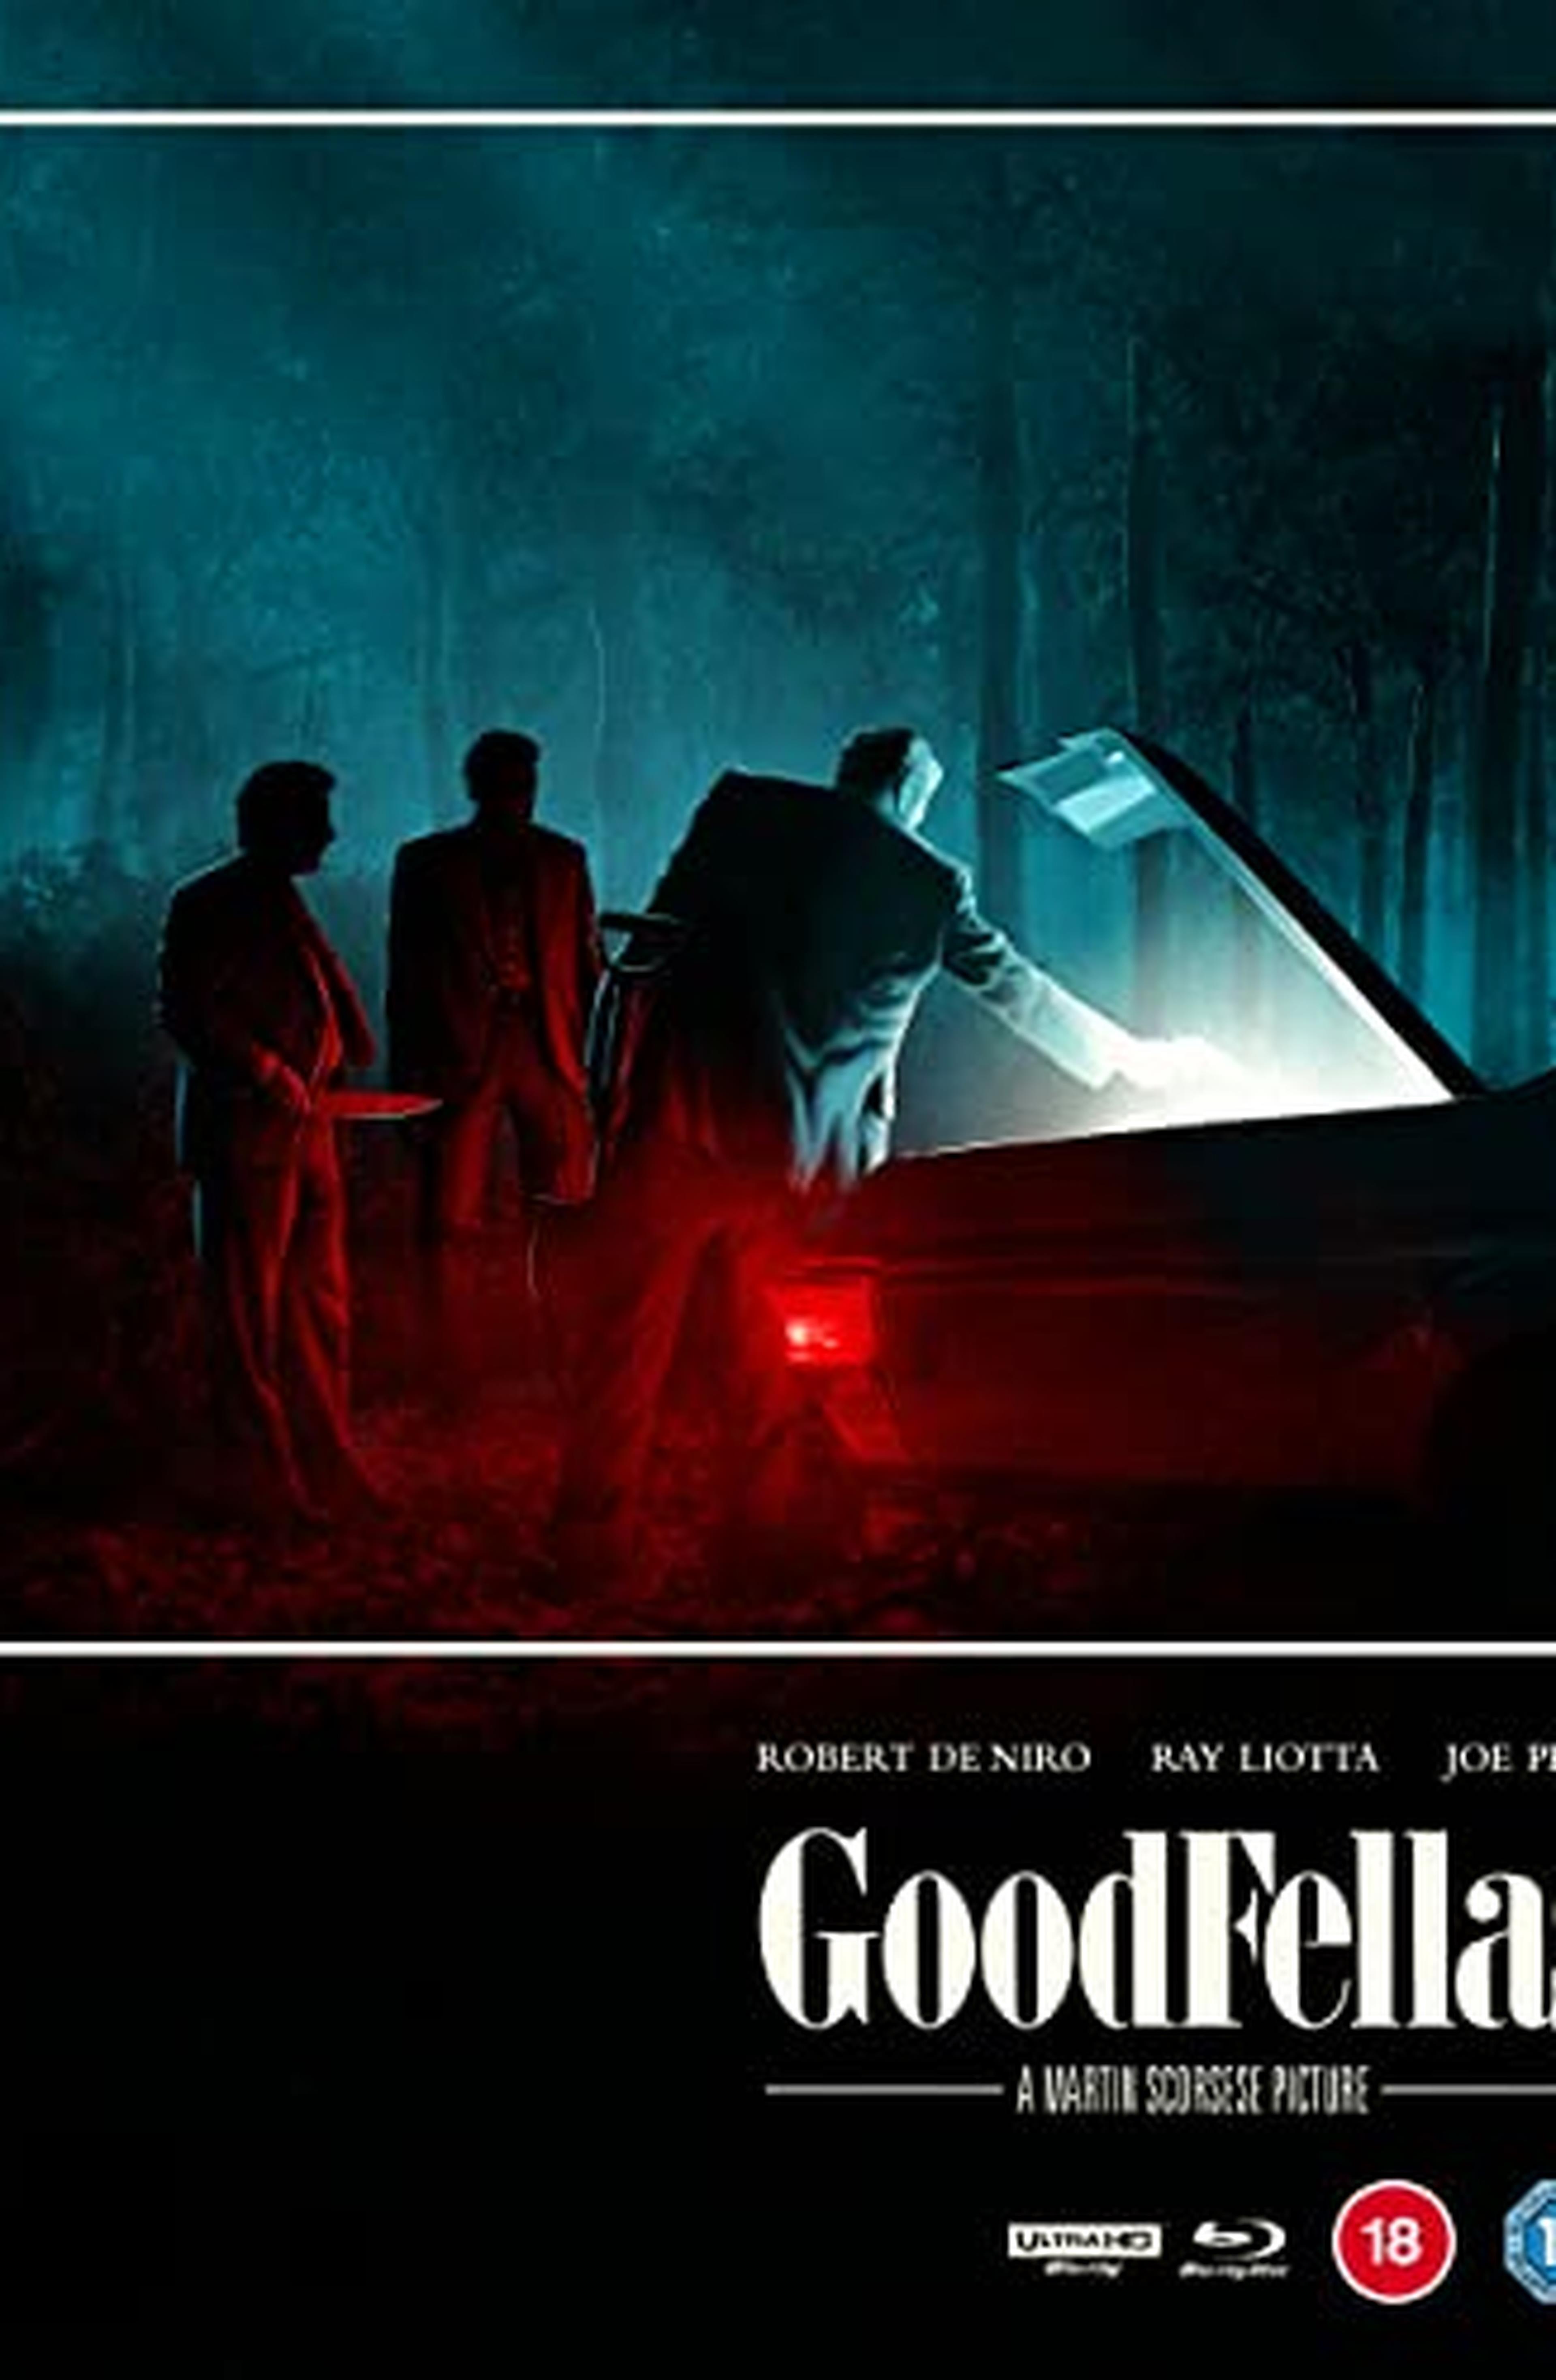 Goodfellas (Limited "Film Vault" Special Edition With Numbered Placque and Artcards)